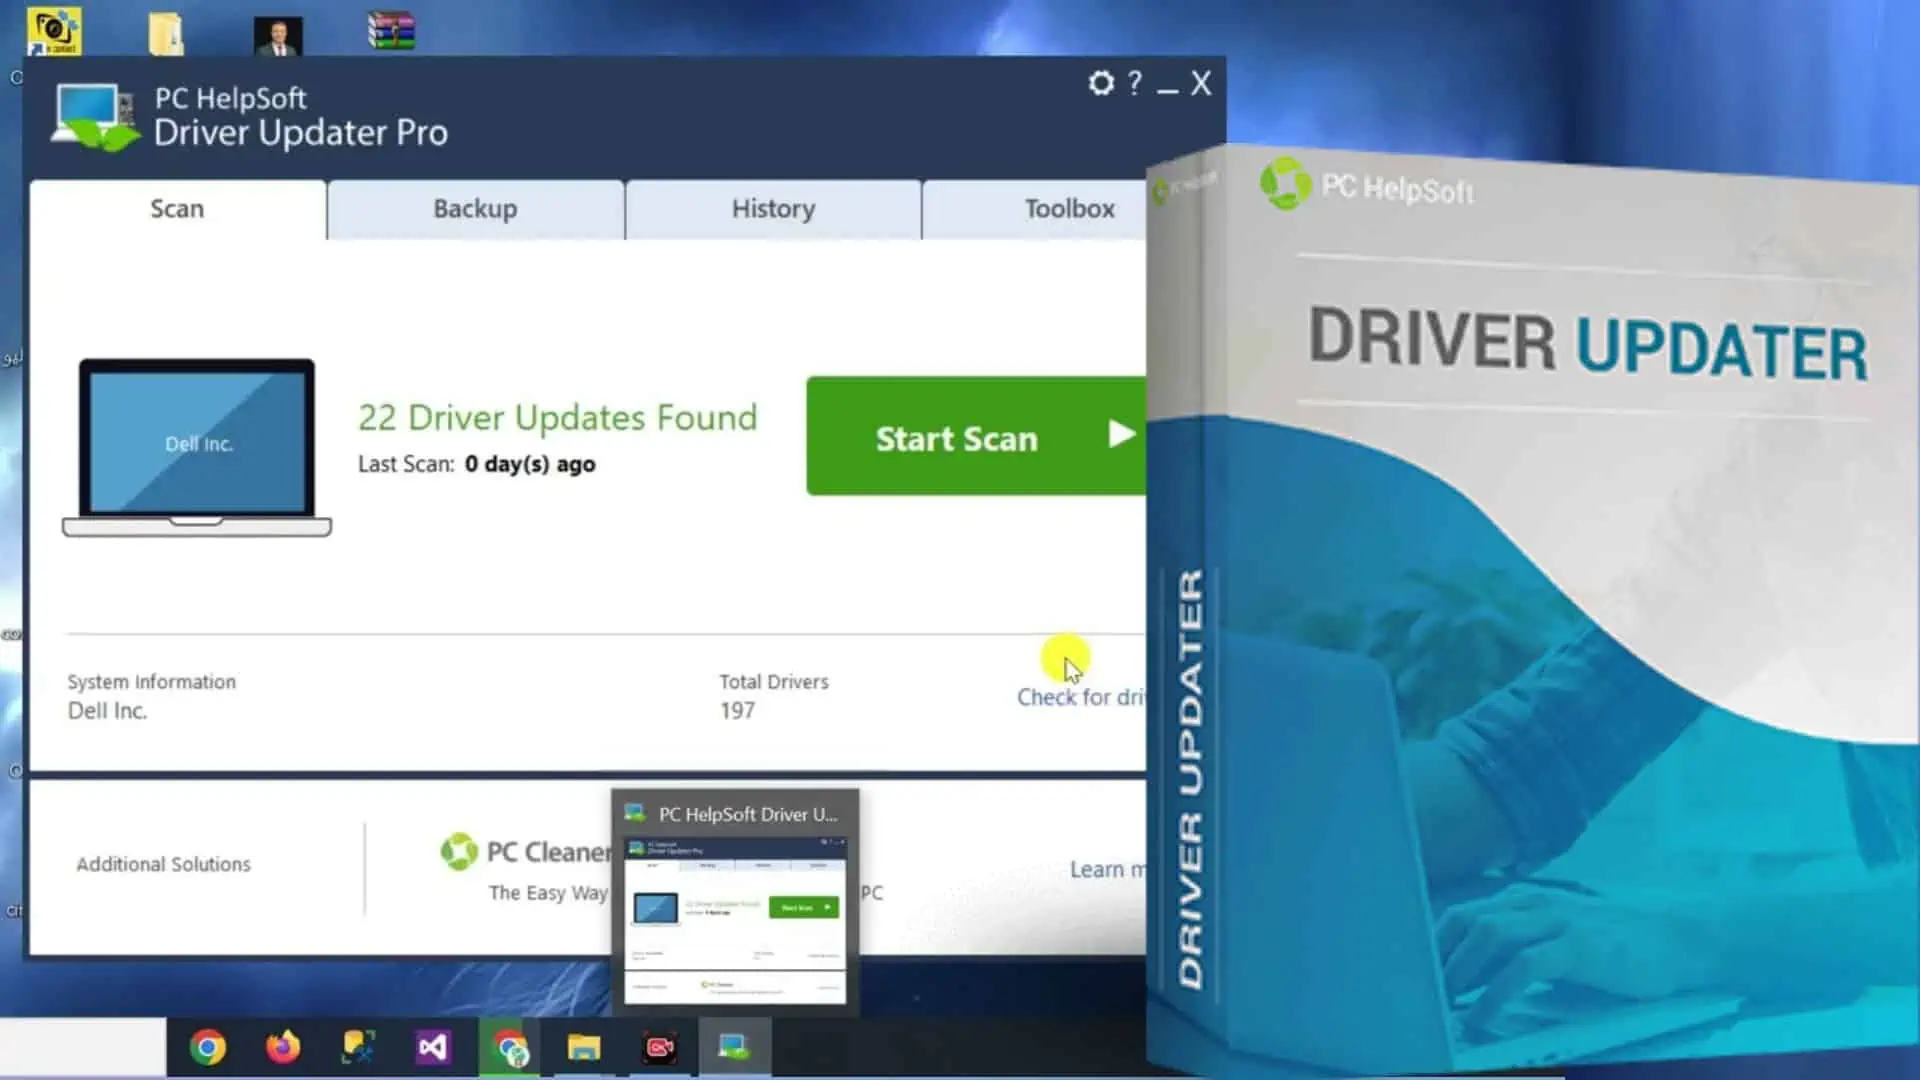 PC Helpsoft Driver Updater Review